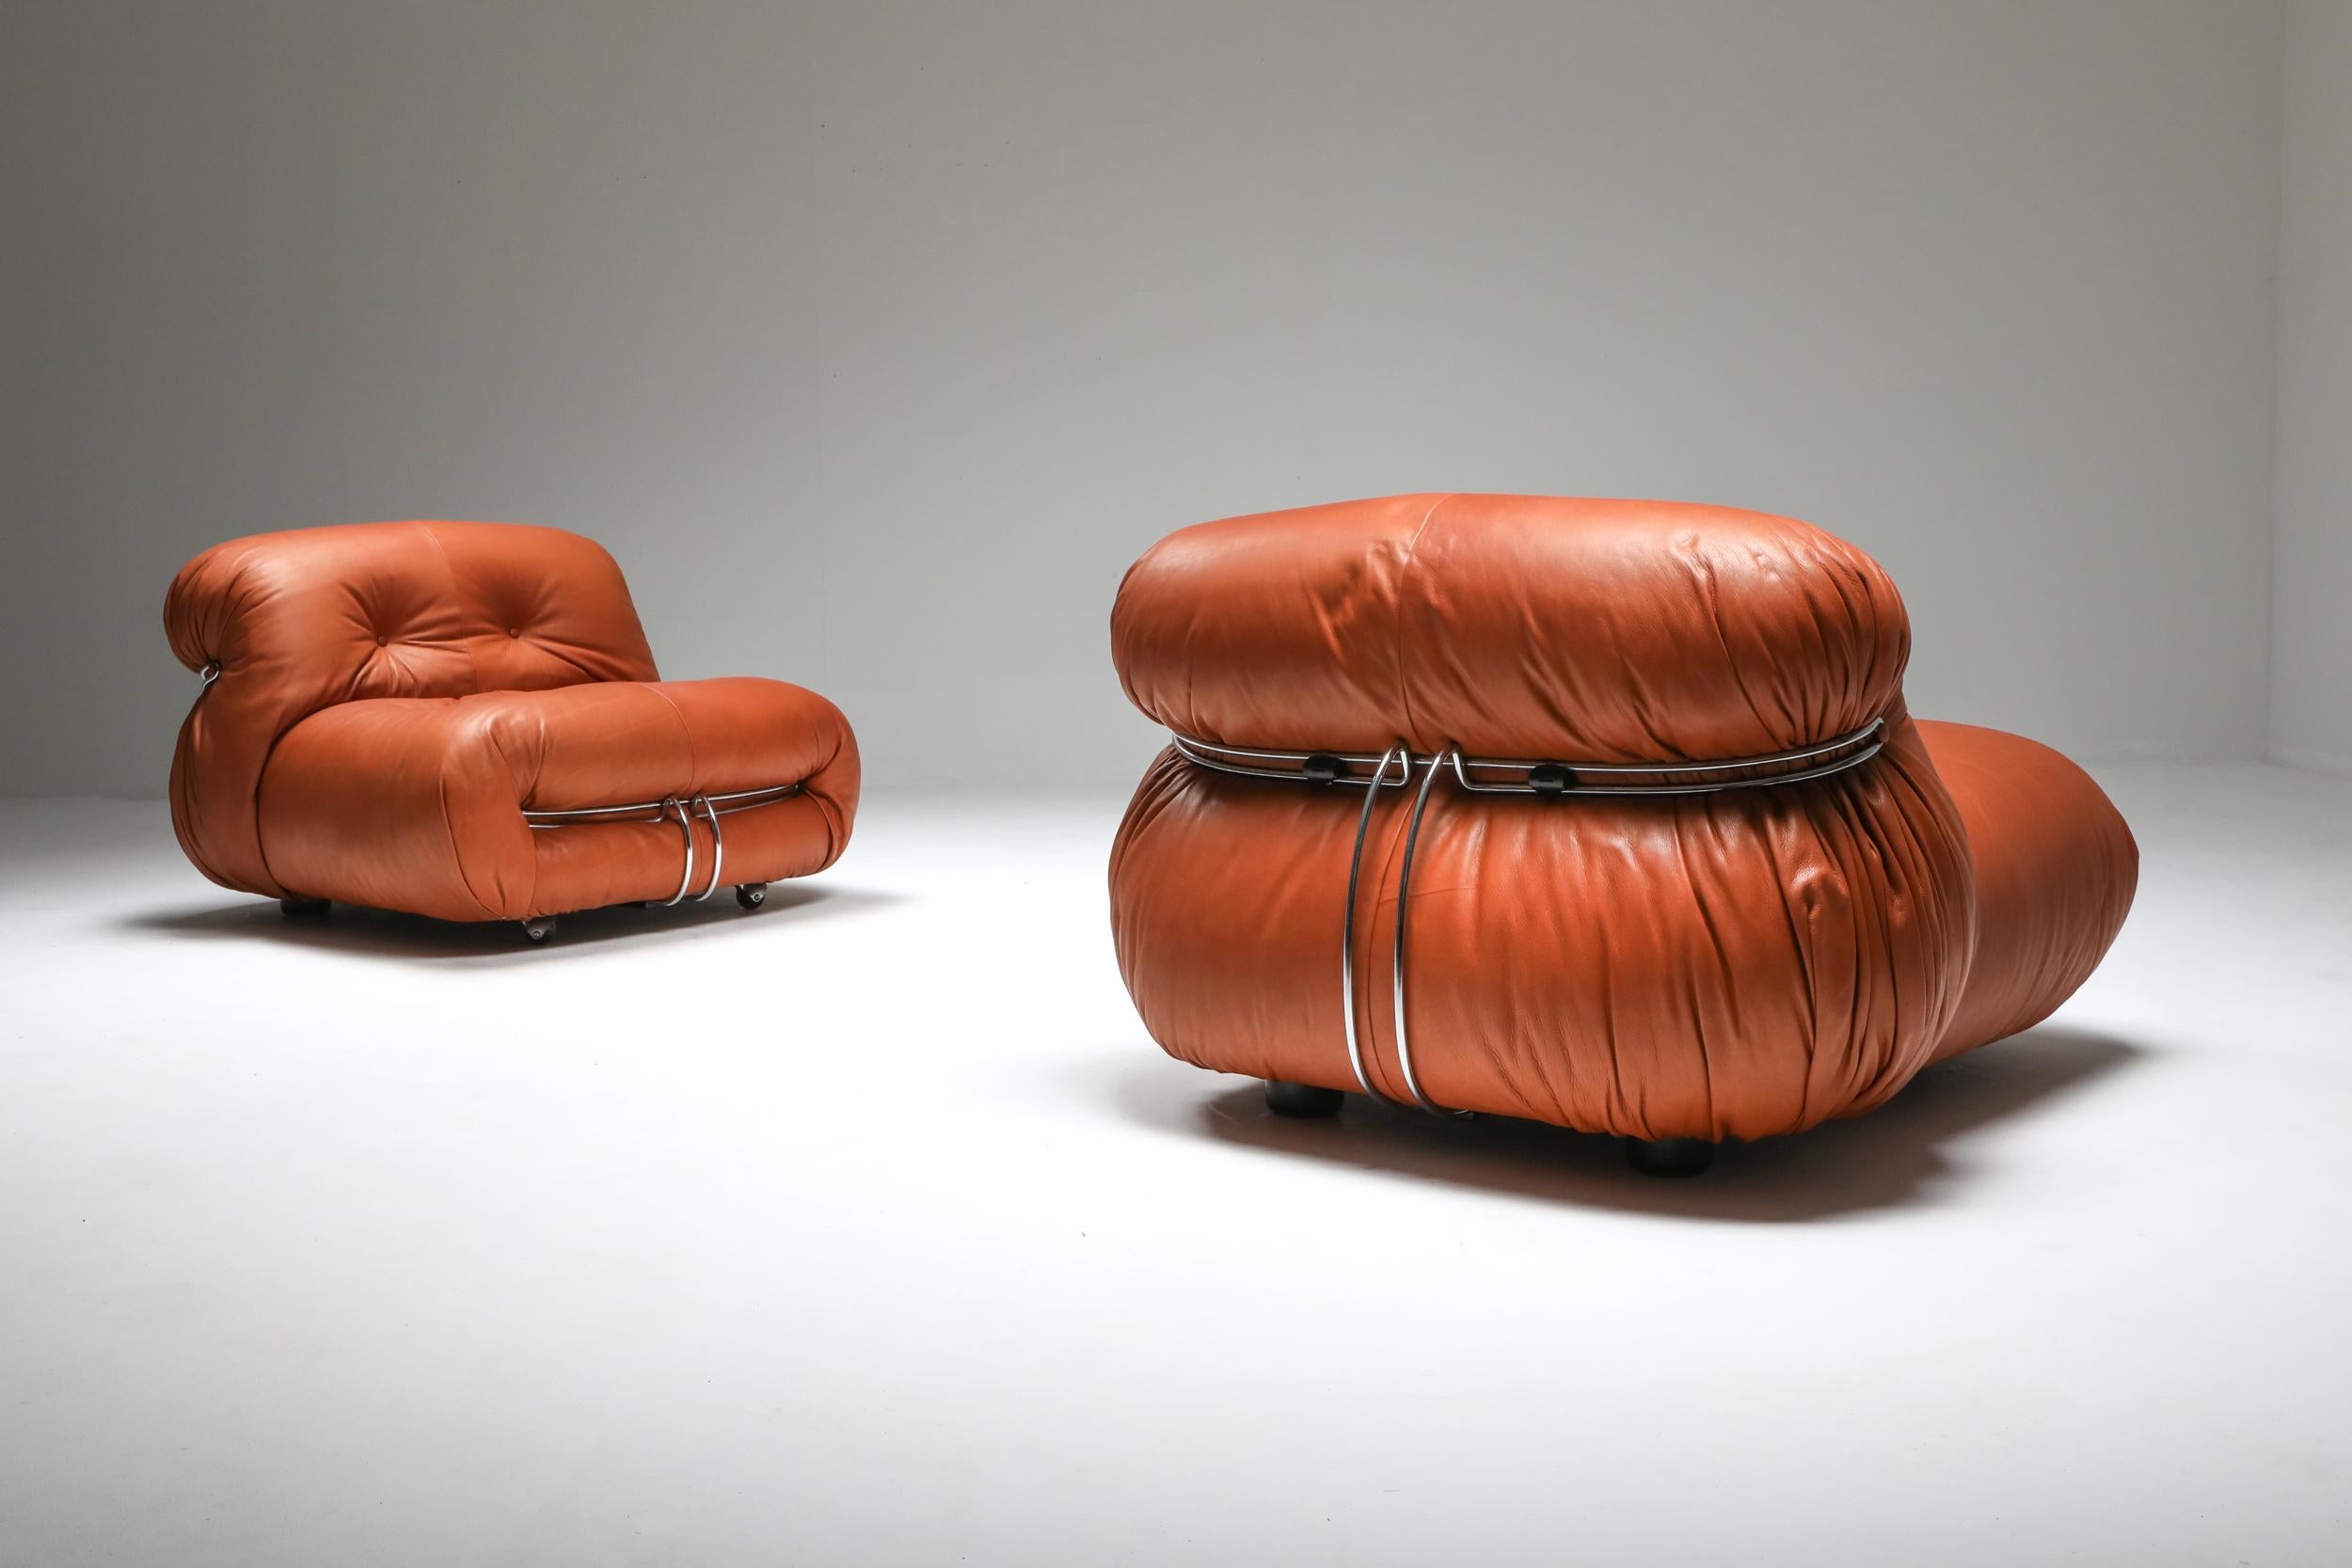 Italian Afra and Tobia Scarpa for Cassina 'Soriana' Pair of Lounge Chairs, 1970's For Sale